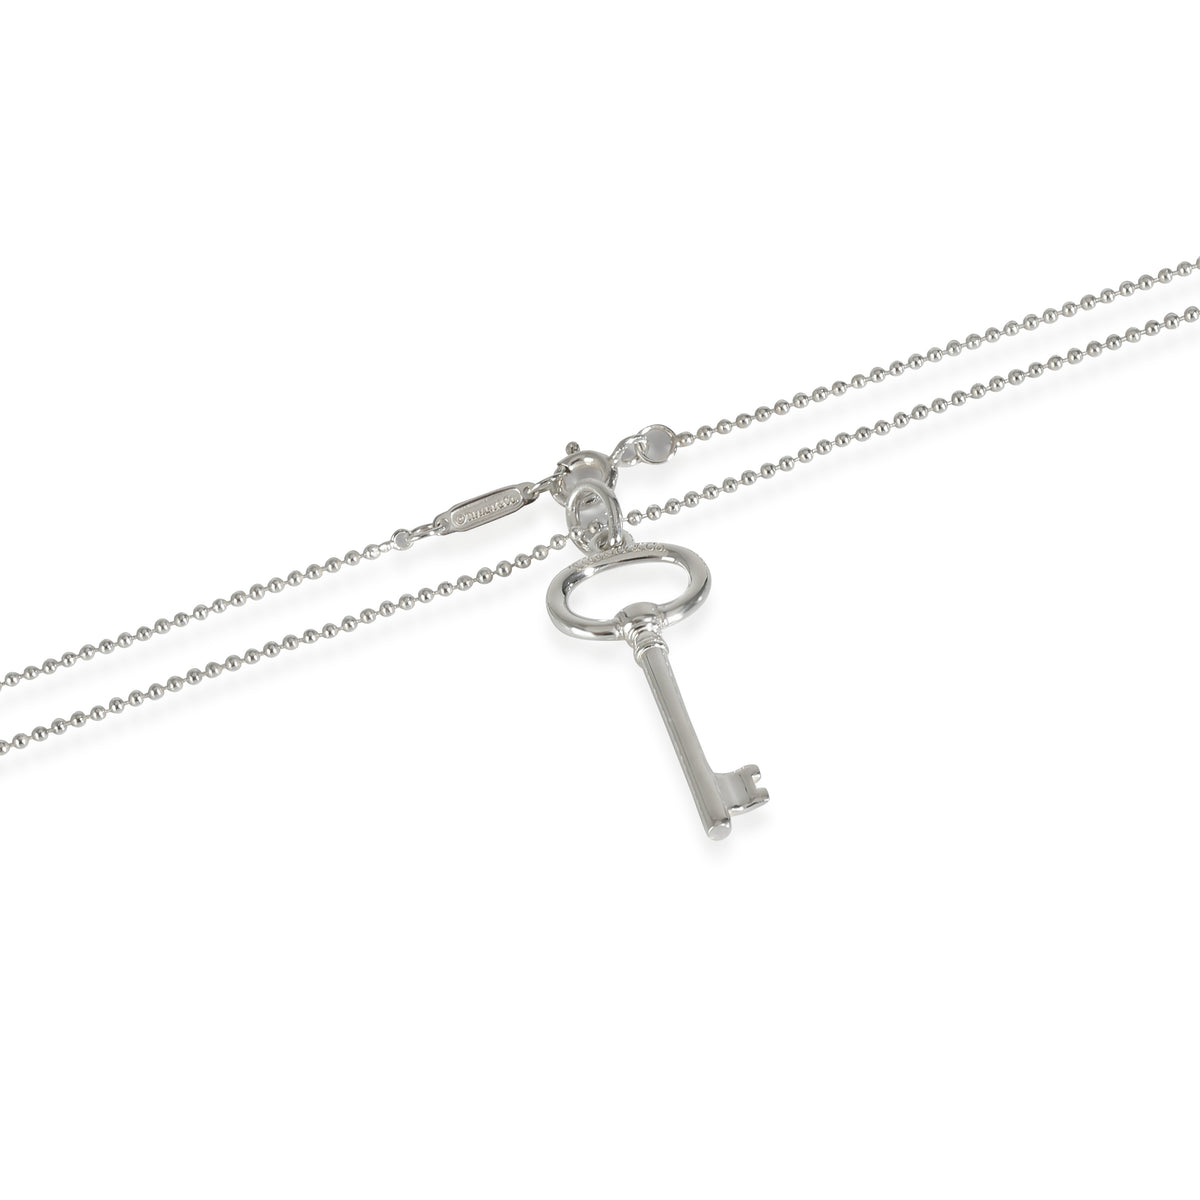 Mini Oval Key Pendant on Bead Chain in Sterling Silver